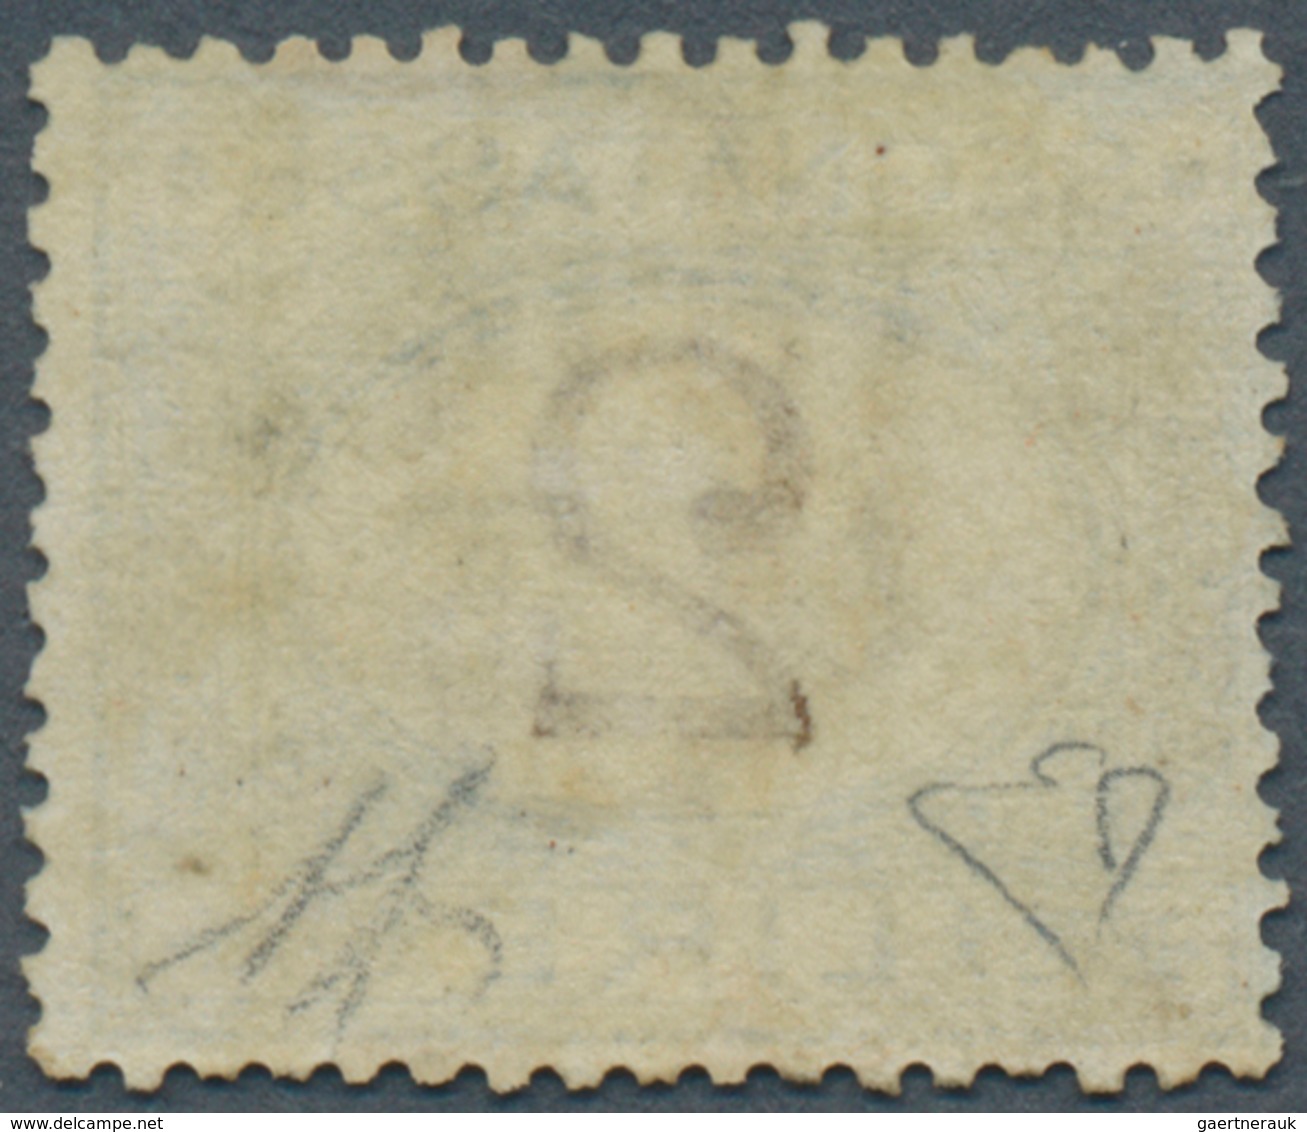 Italien - Portomarken: 1870, 2l. Blue/brown, Fresh Colour, Normally Perforated With Some Slightly Un - Taxe